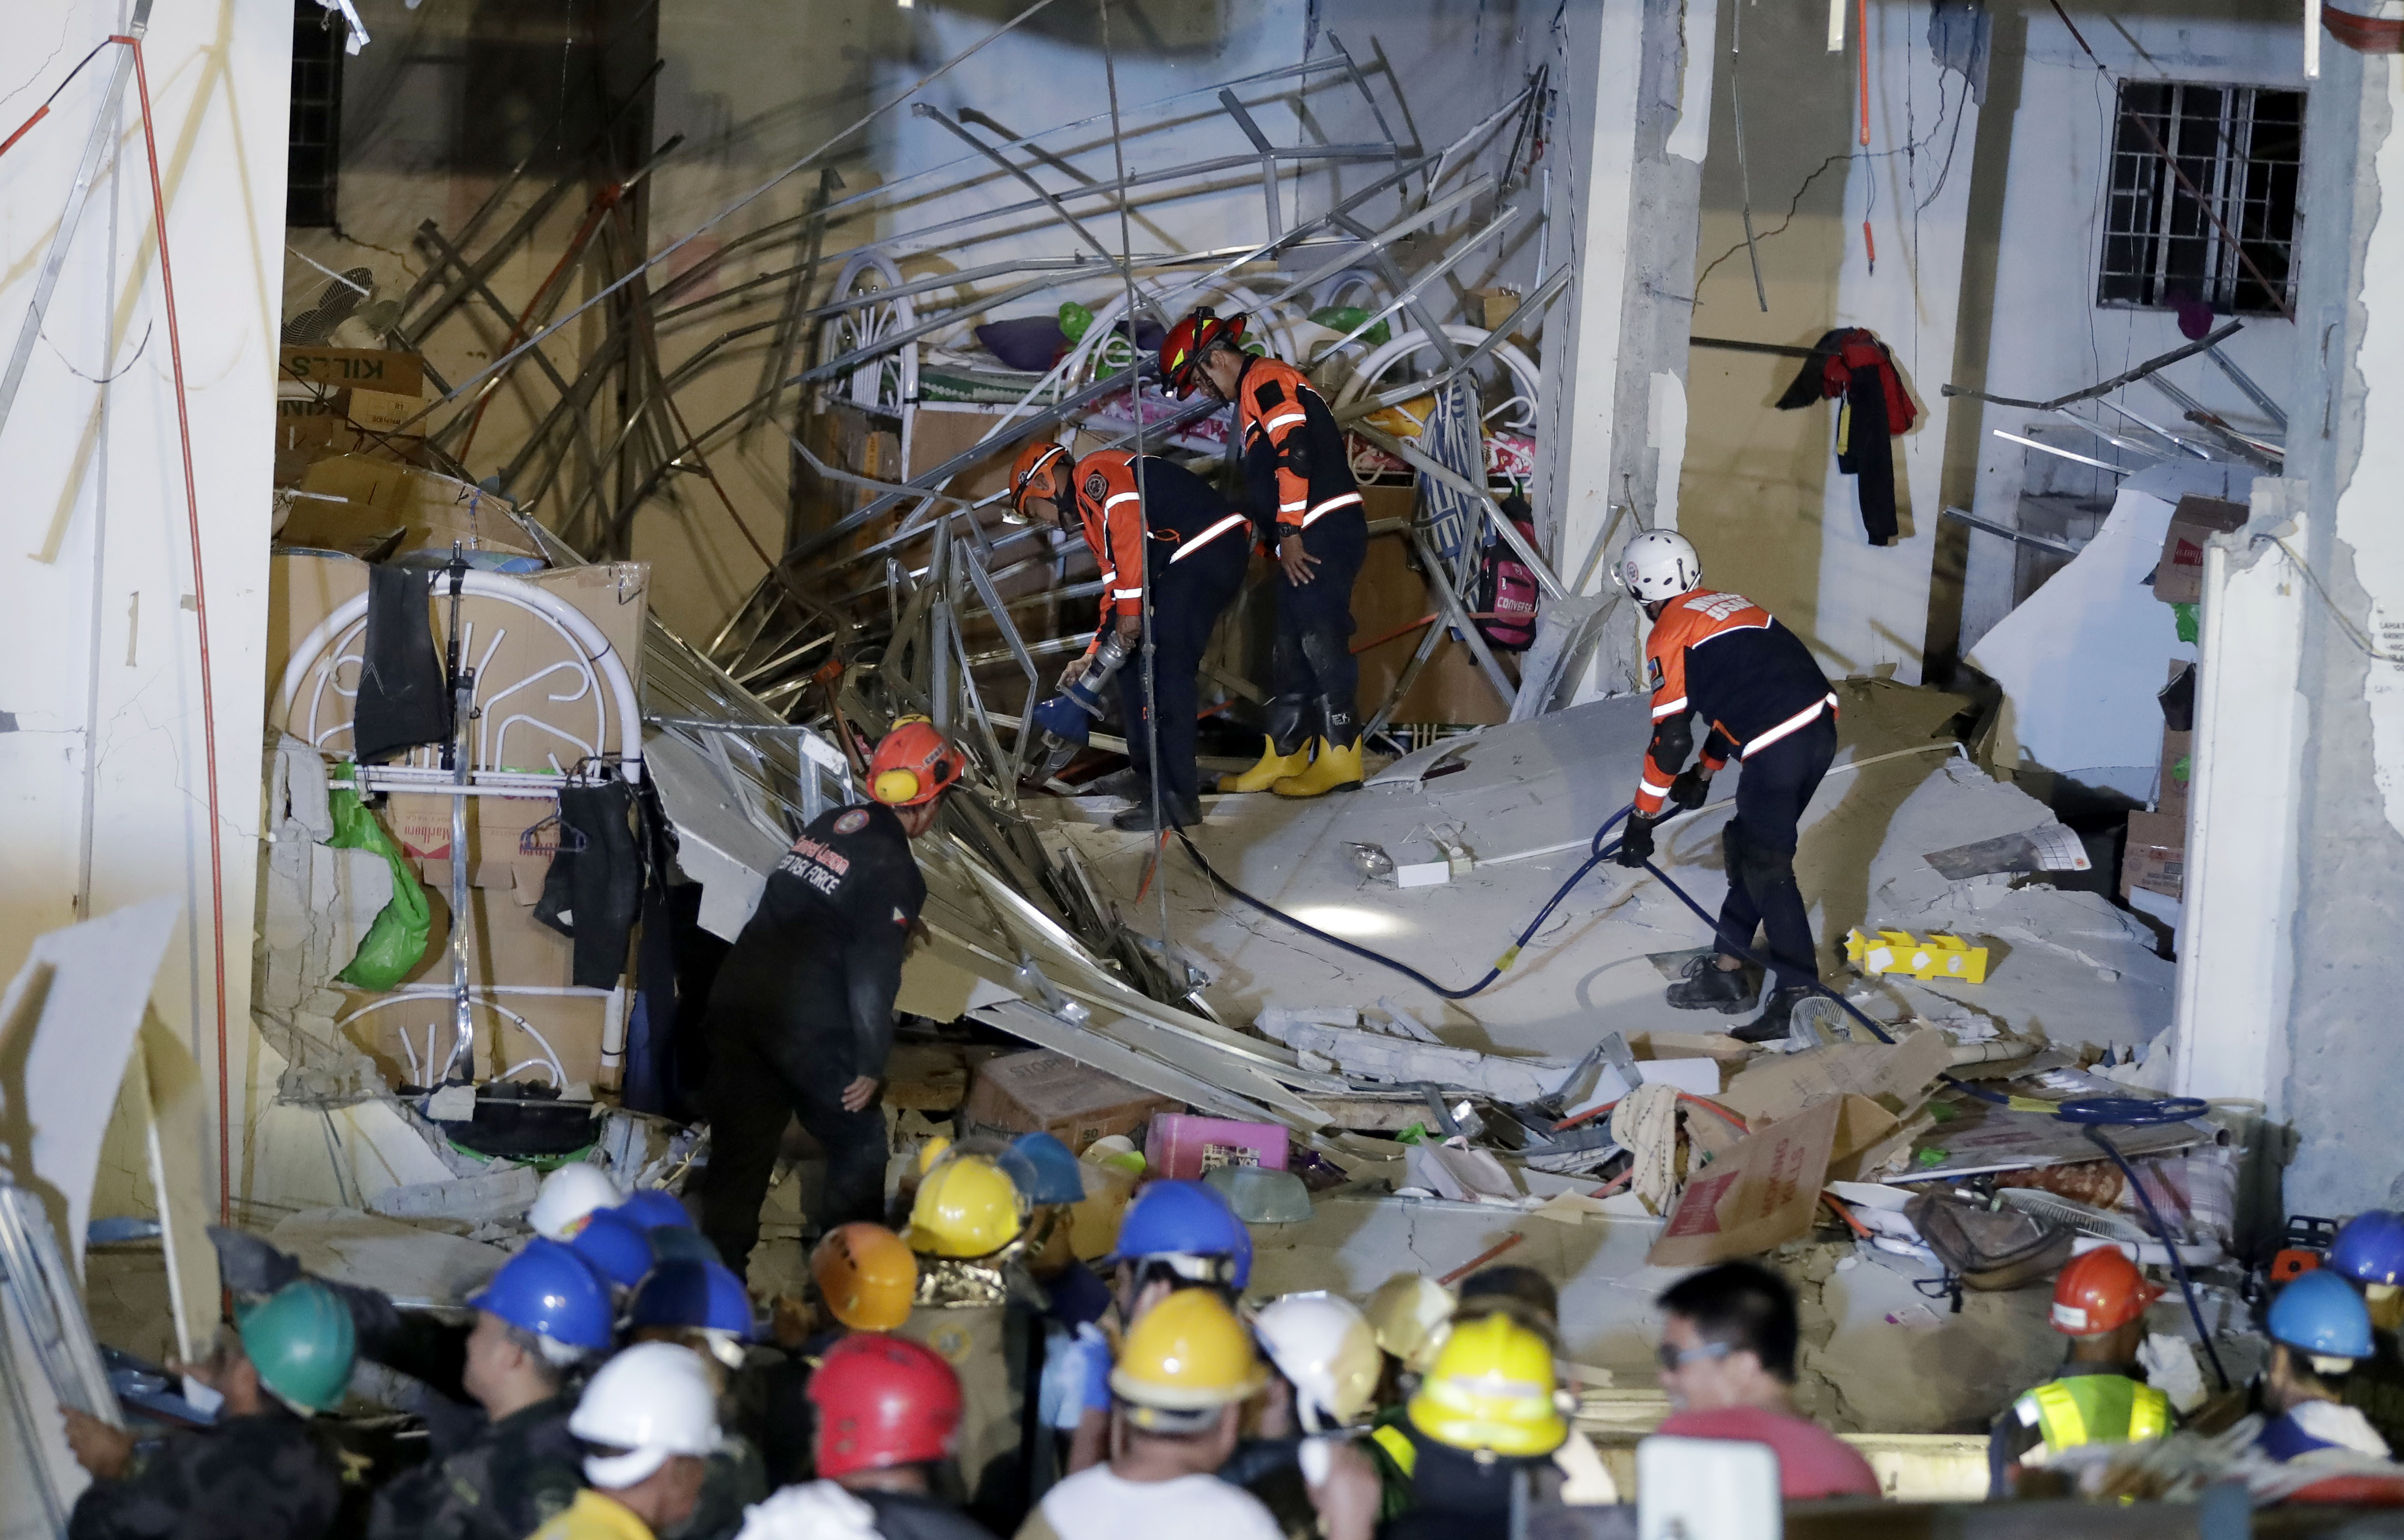 Rescuers continue to search for survivors following Monday's magnitude 6.1 earthquake that caused the collapse of a commercial building in Porac township, Pampanga province north of Manila, Philippines, Tuesday, April 23, 2019. A strong earthquake struck the northern Philippines Monday trapping some people in a collapsed building, damaging an airport terminal and knocking out power in at least one province, officials said. (AP Photo/Bullit Marquez)